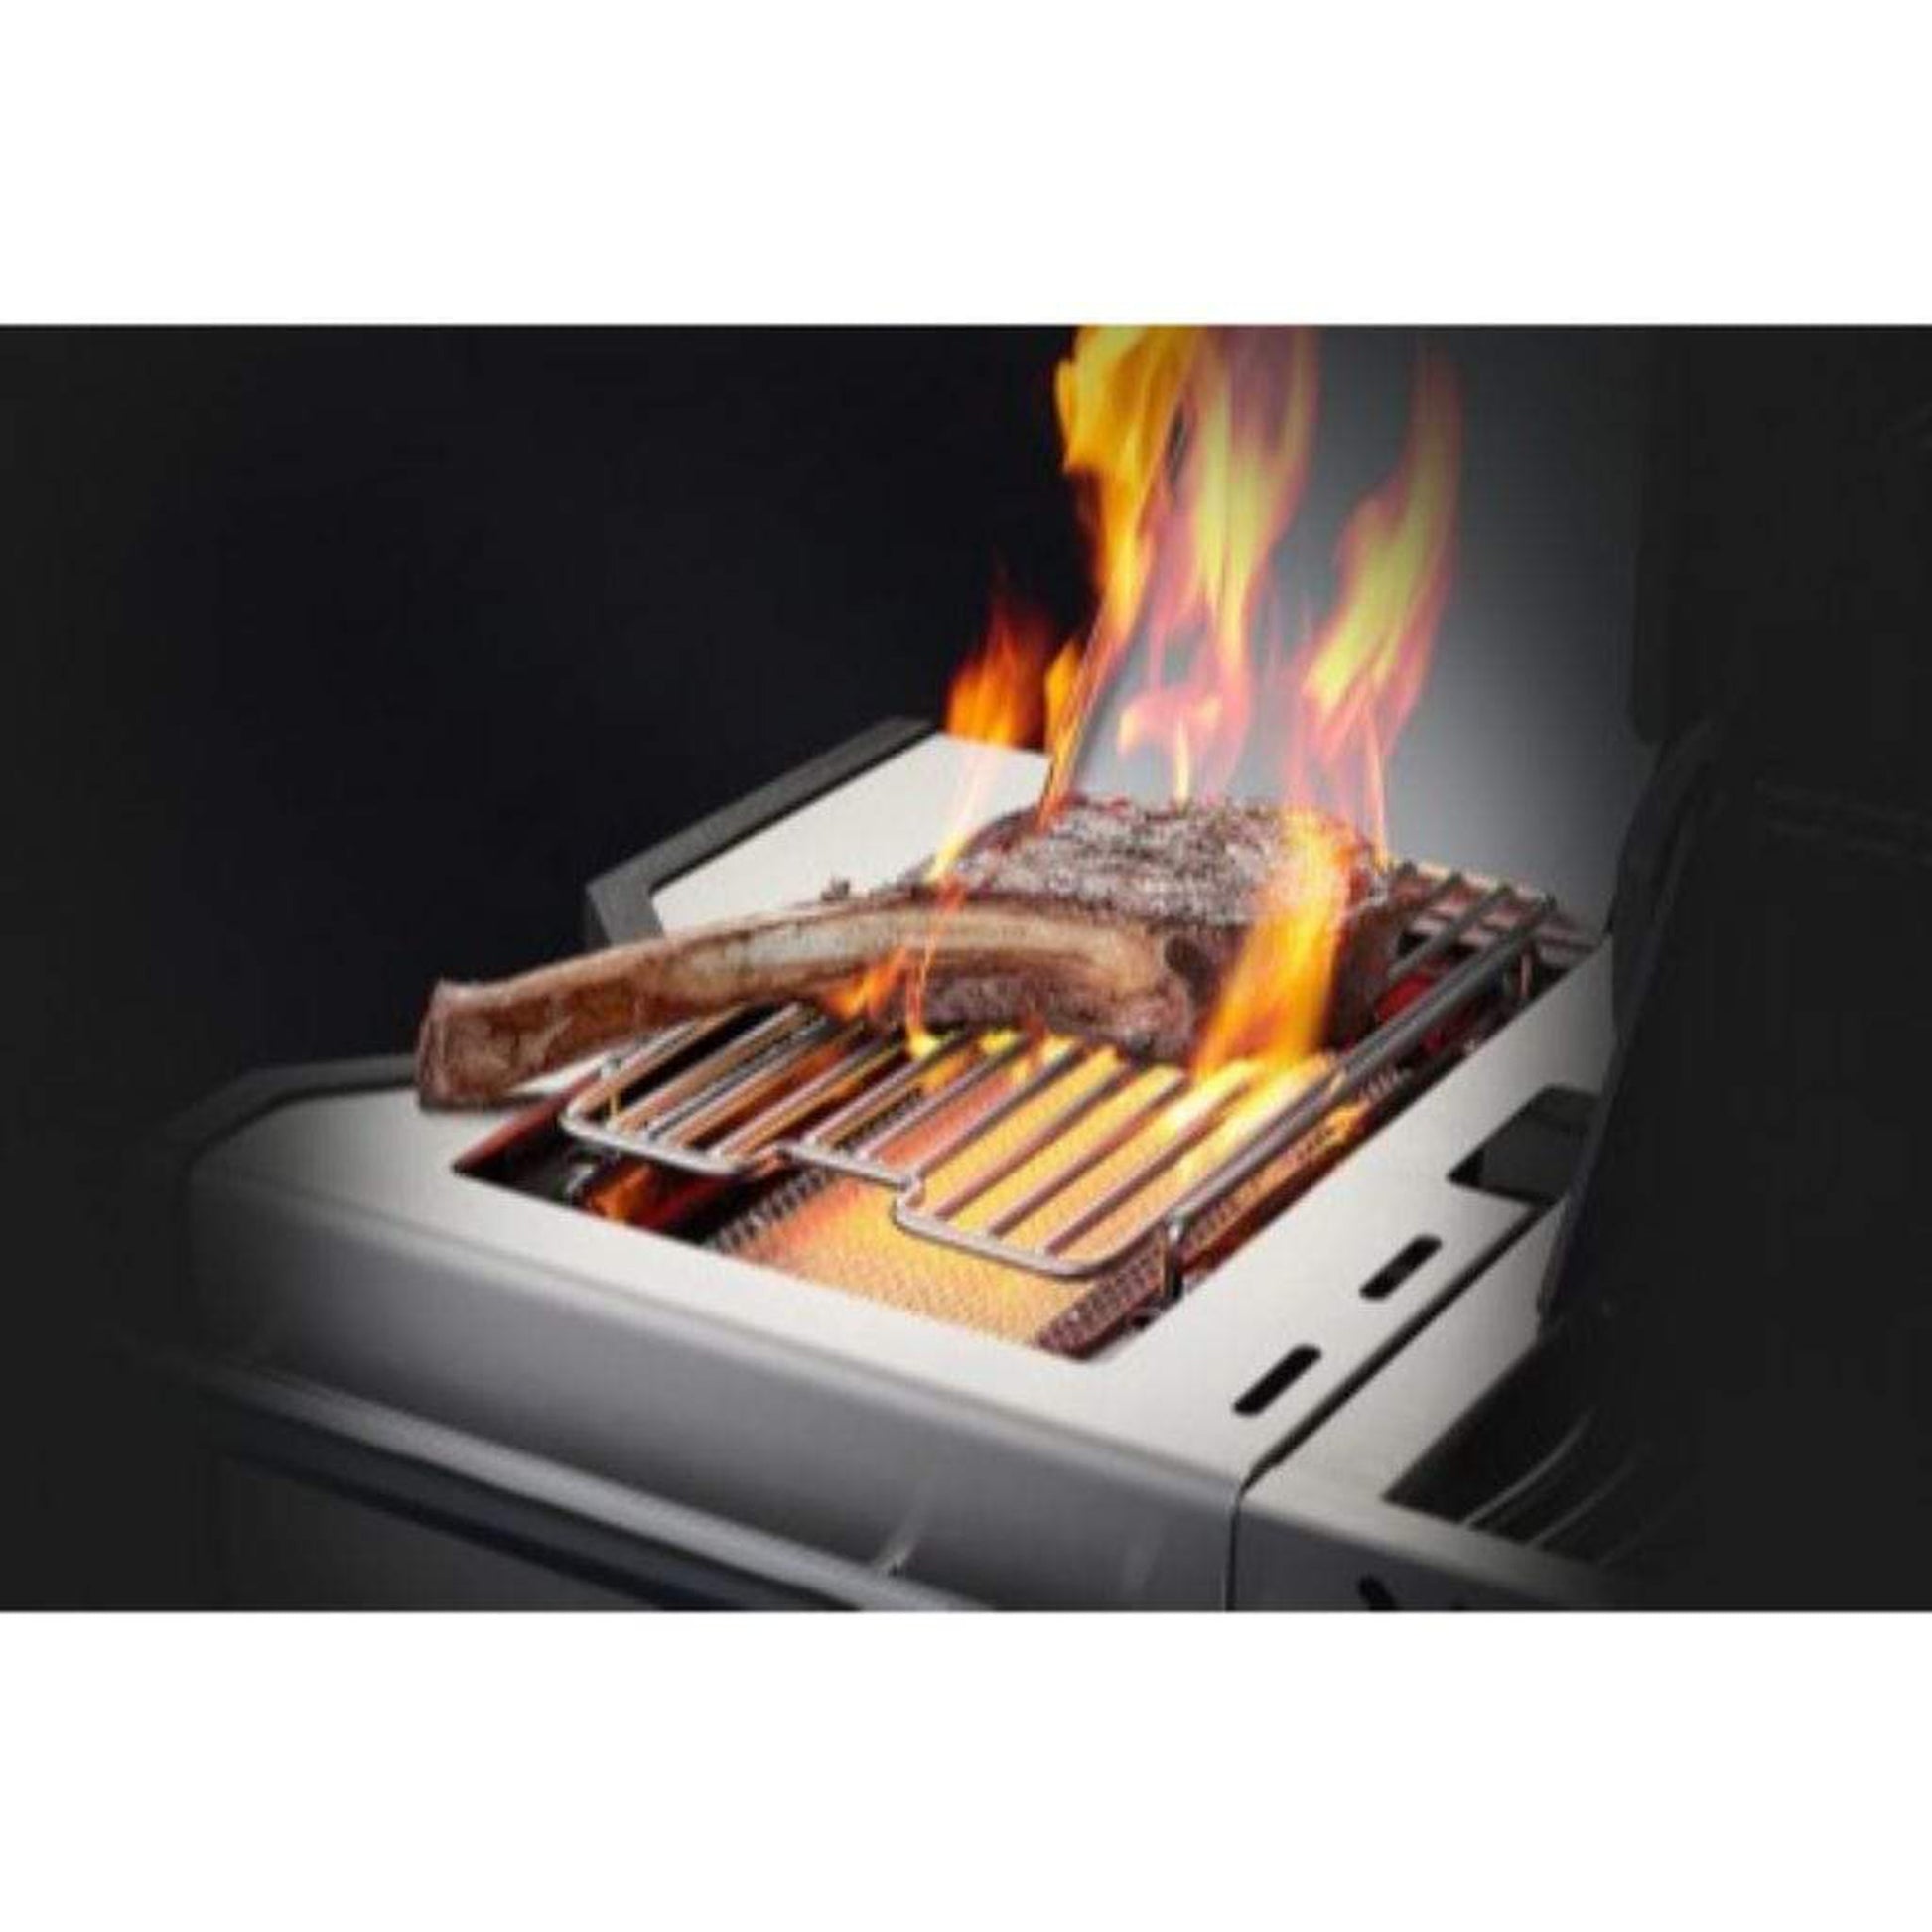 Napoleon 67" Prestige PRO 500 Freestanding Gas Grill with Infrared Rear Burner and Infrared Side Burners